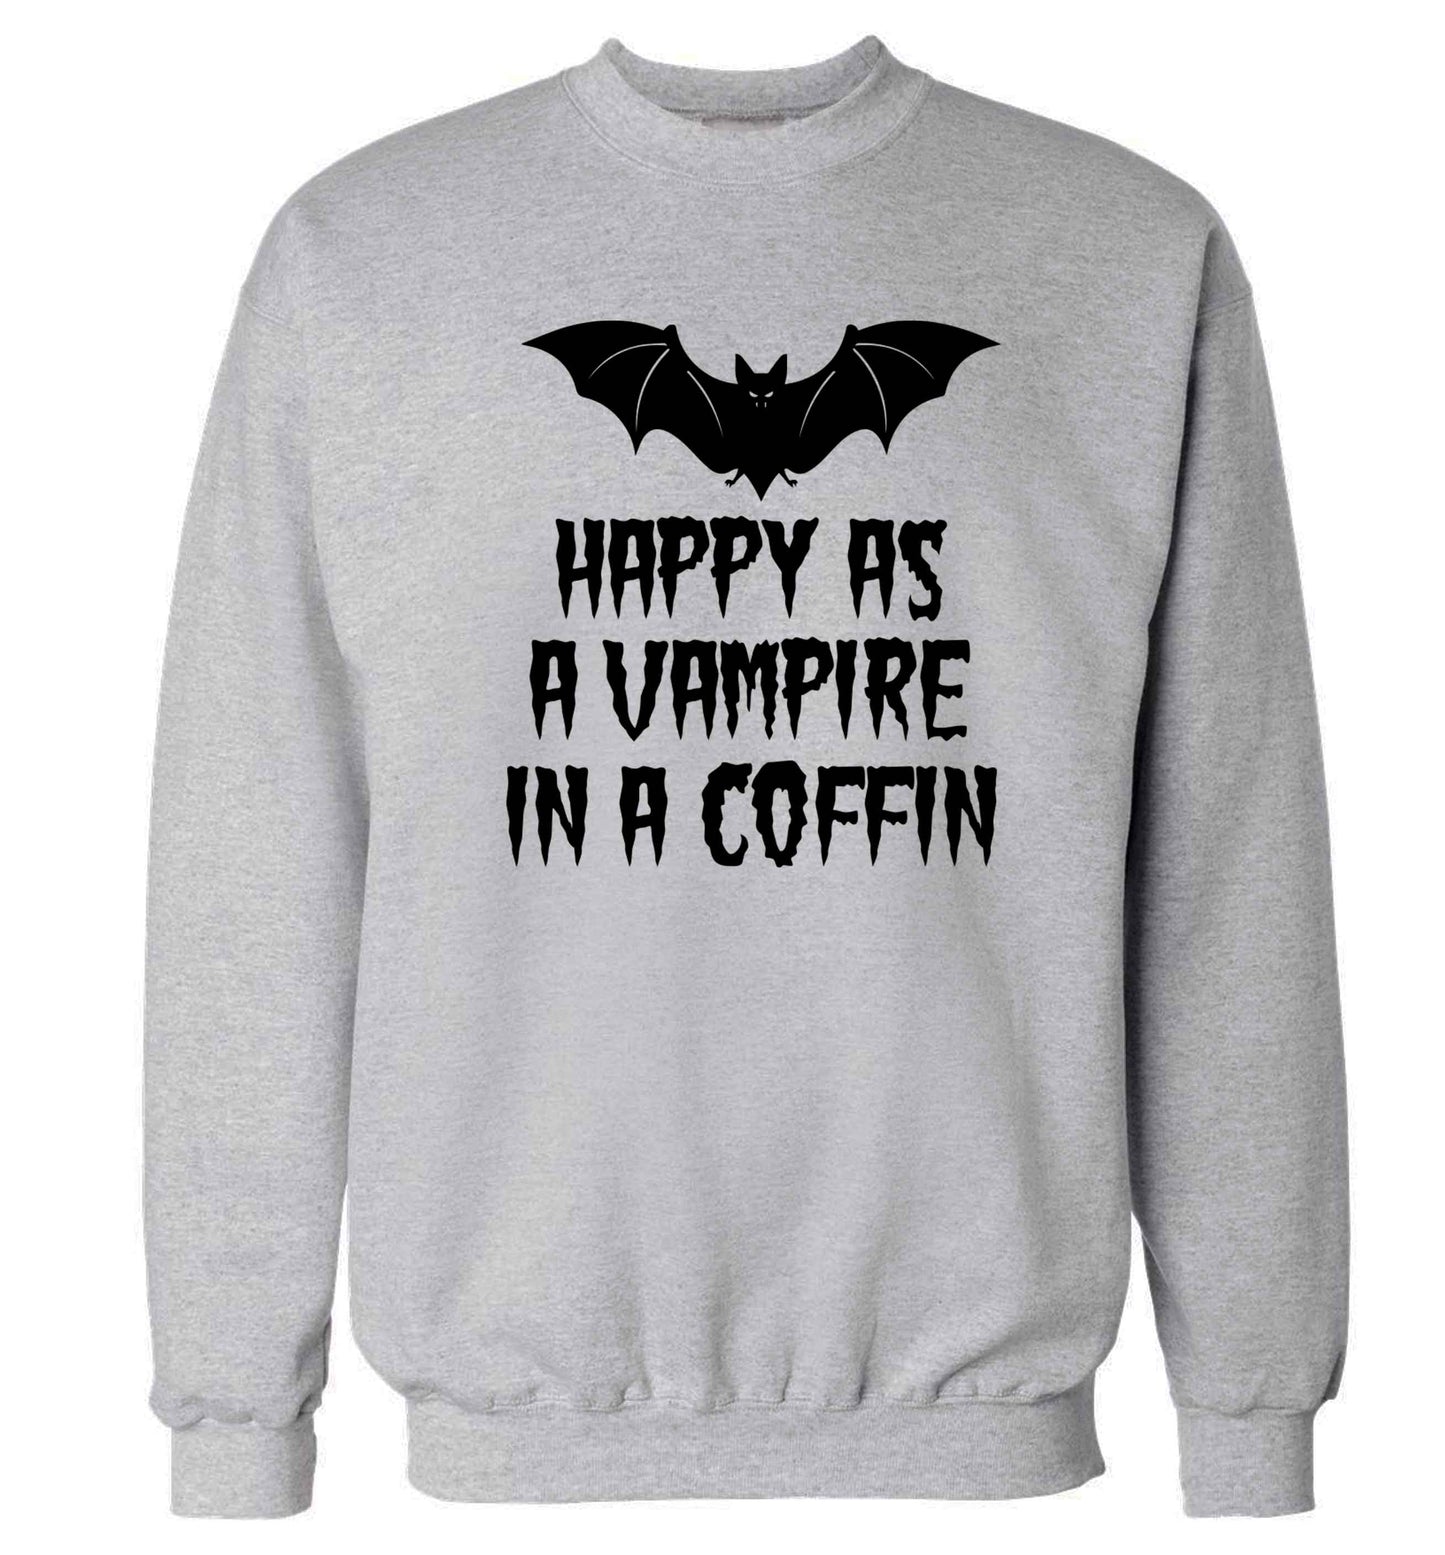 Happy as a vampire in a coffin Adult's unisex grey Sweater 2XL